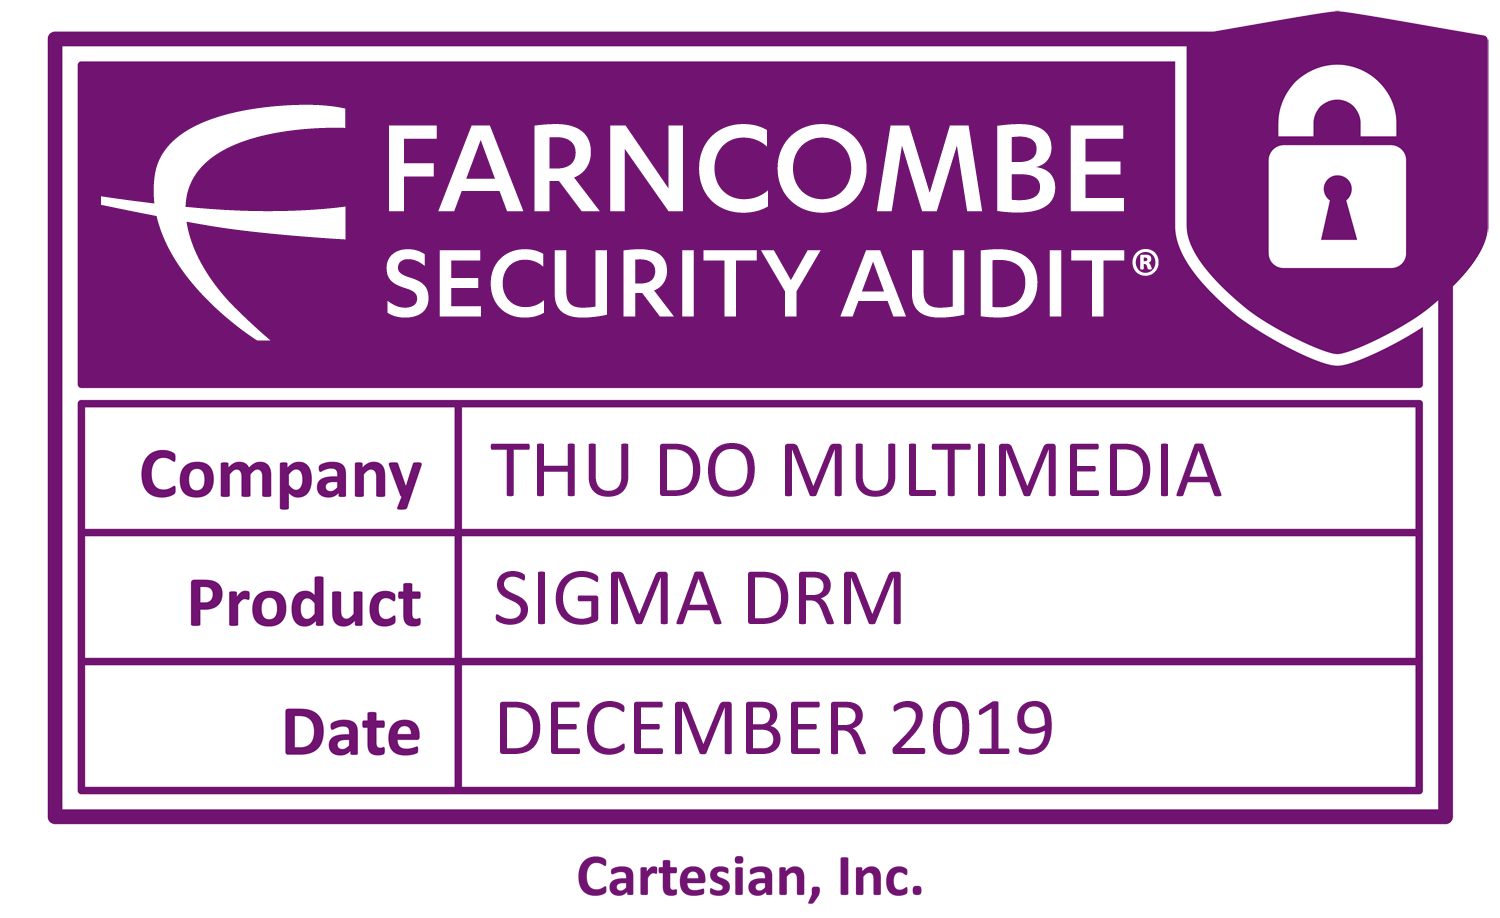 Sigma DRM by Thu Do Multimedia completes Cartesian’s Farncombe Security Audit®